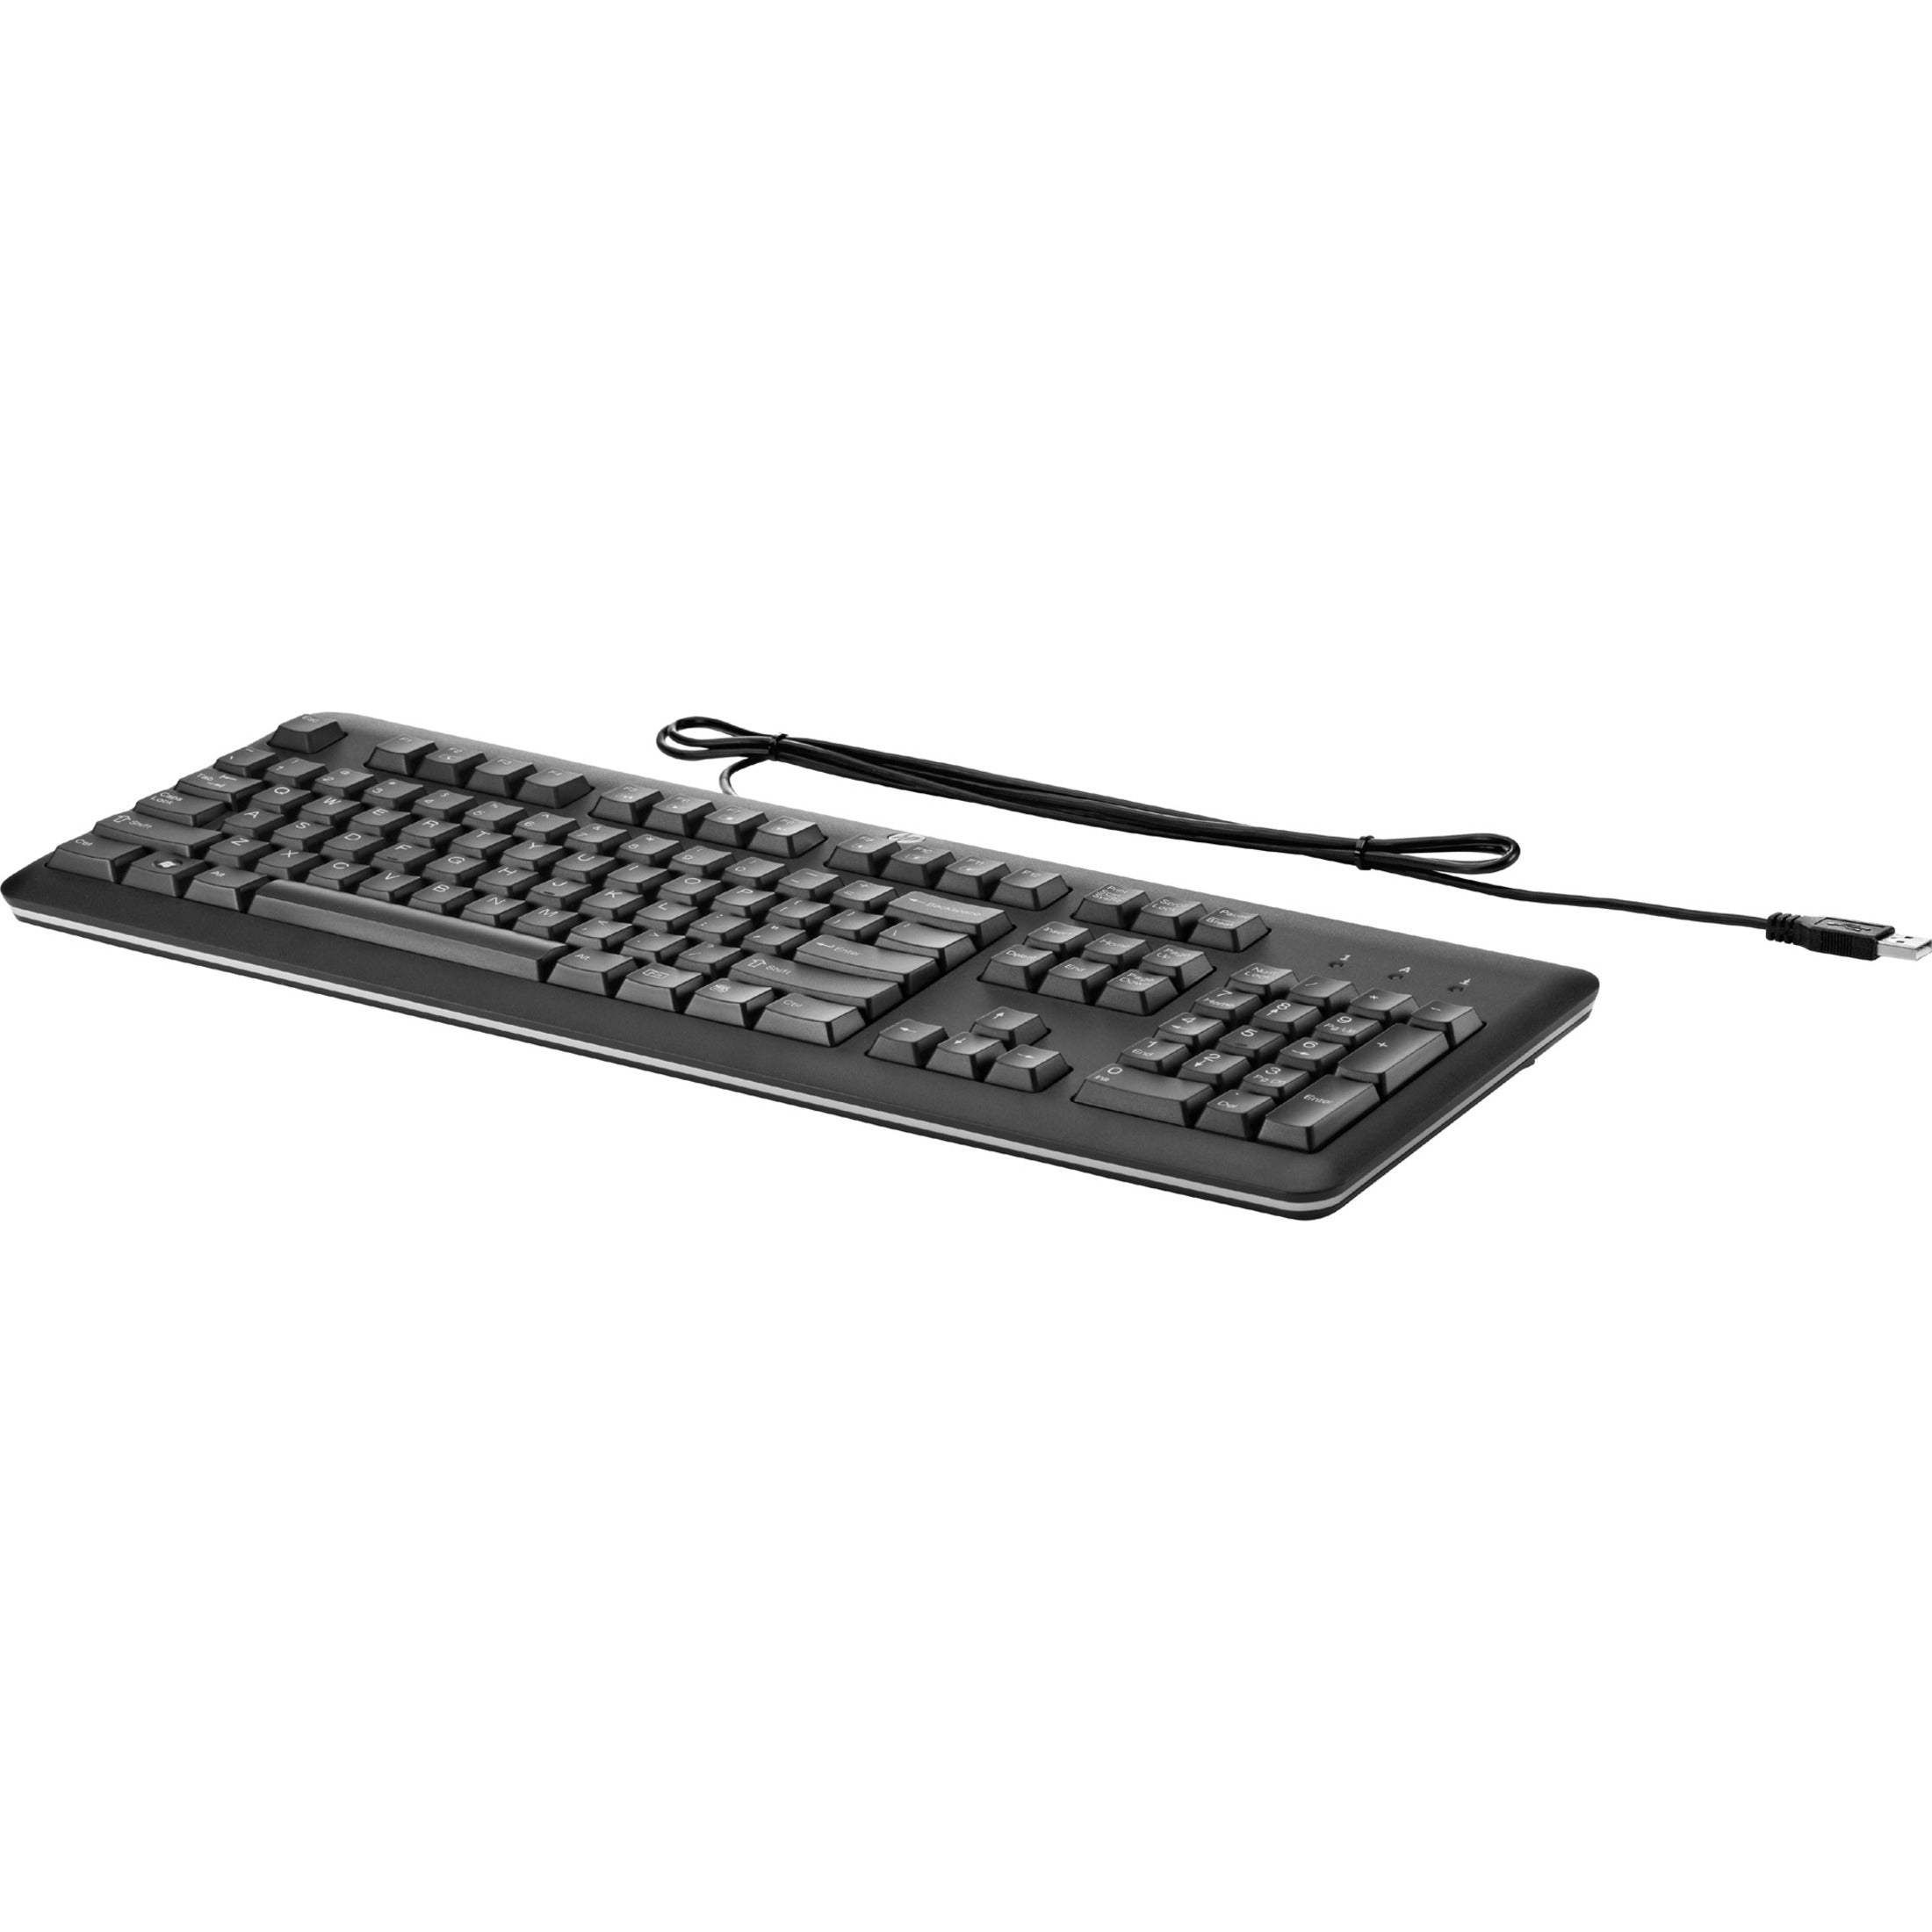 HPI SOURCING - NEW USB Keyboard, Spill Drain, English, Cable Connectivity